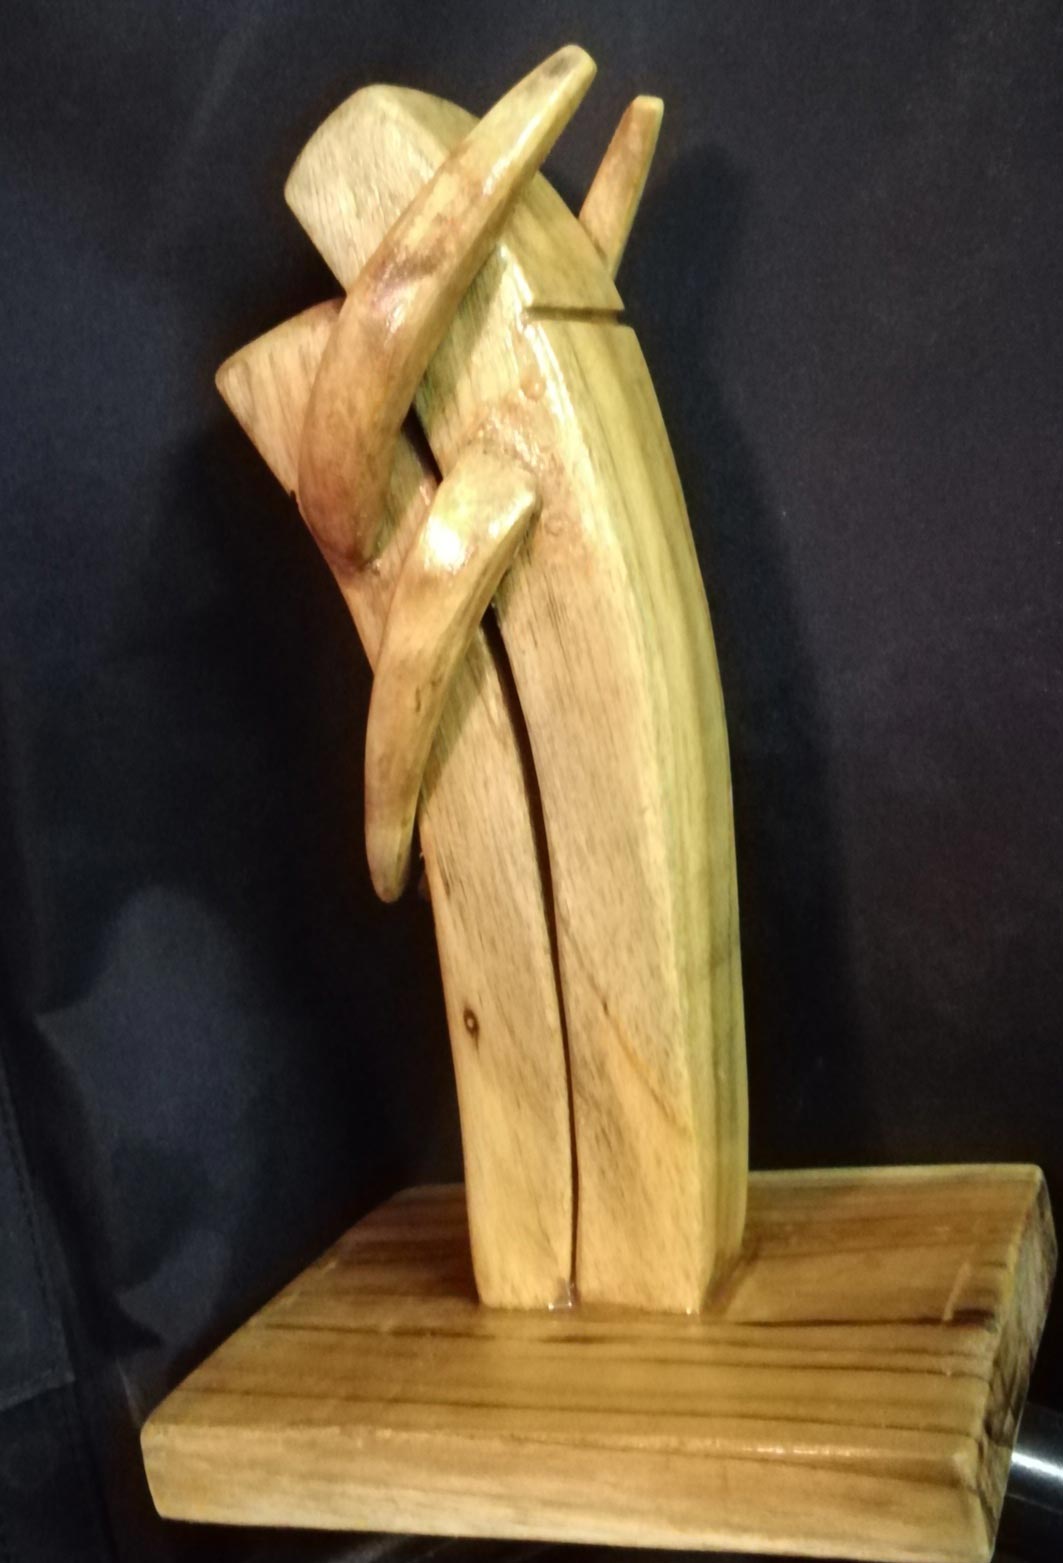 Figurative Sculpture with Wood"Passionate Hug" art by Abhijit Dutta